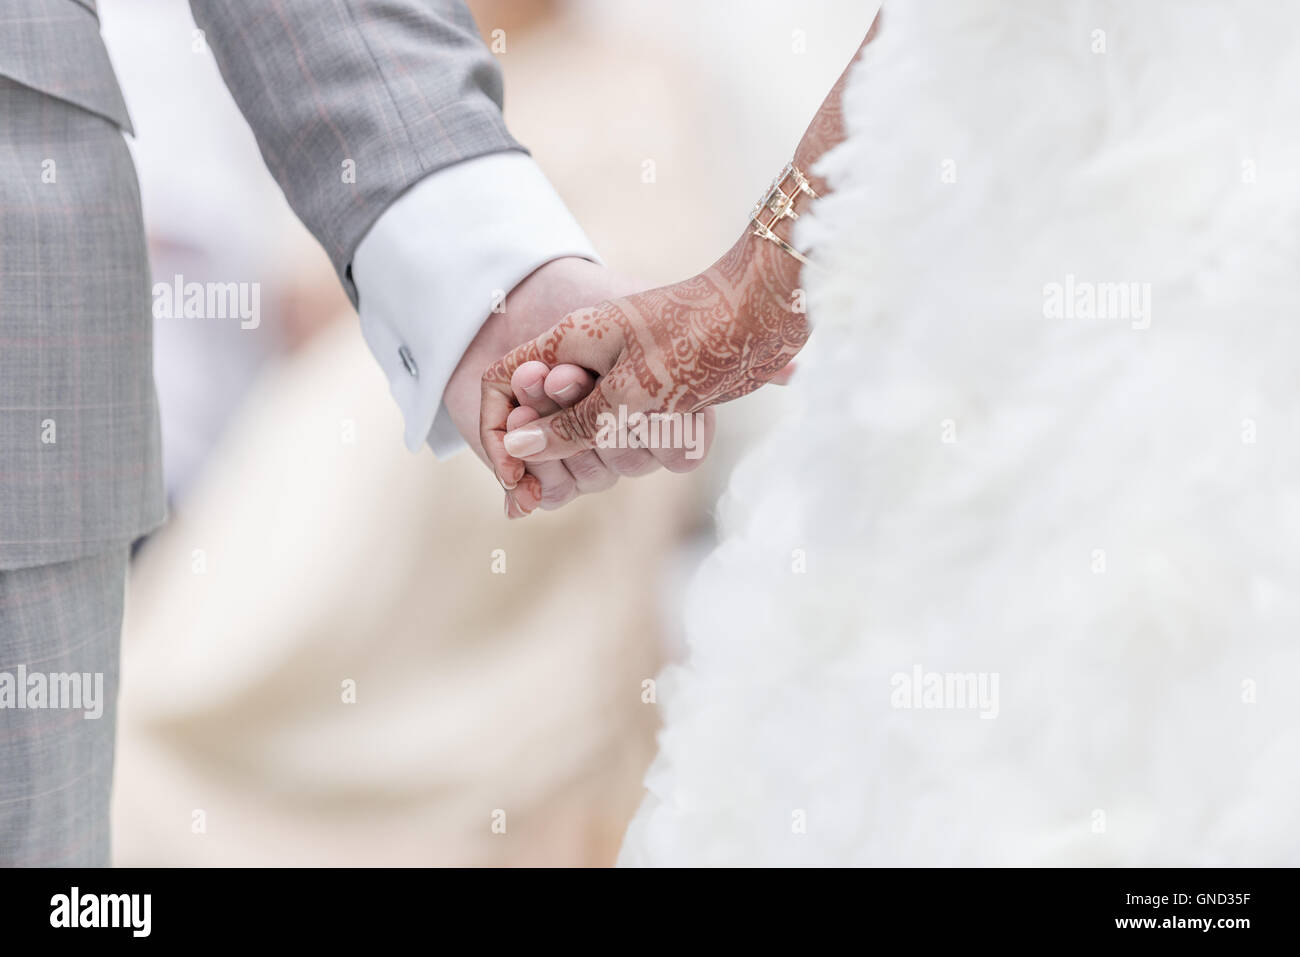 Close-up Holding Hands in Indian wedding rituel. Banque D'Images